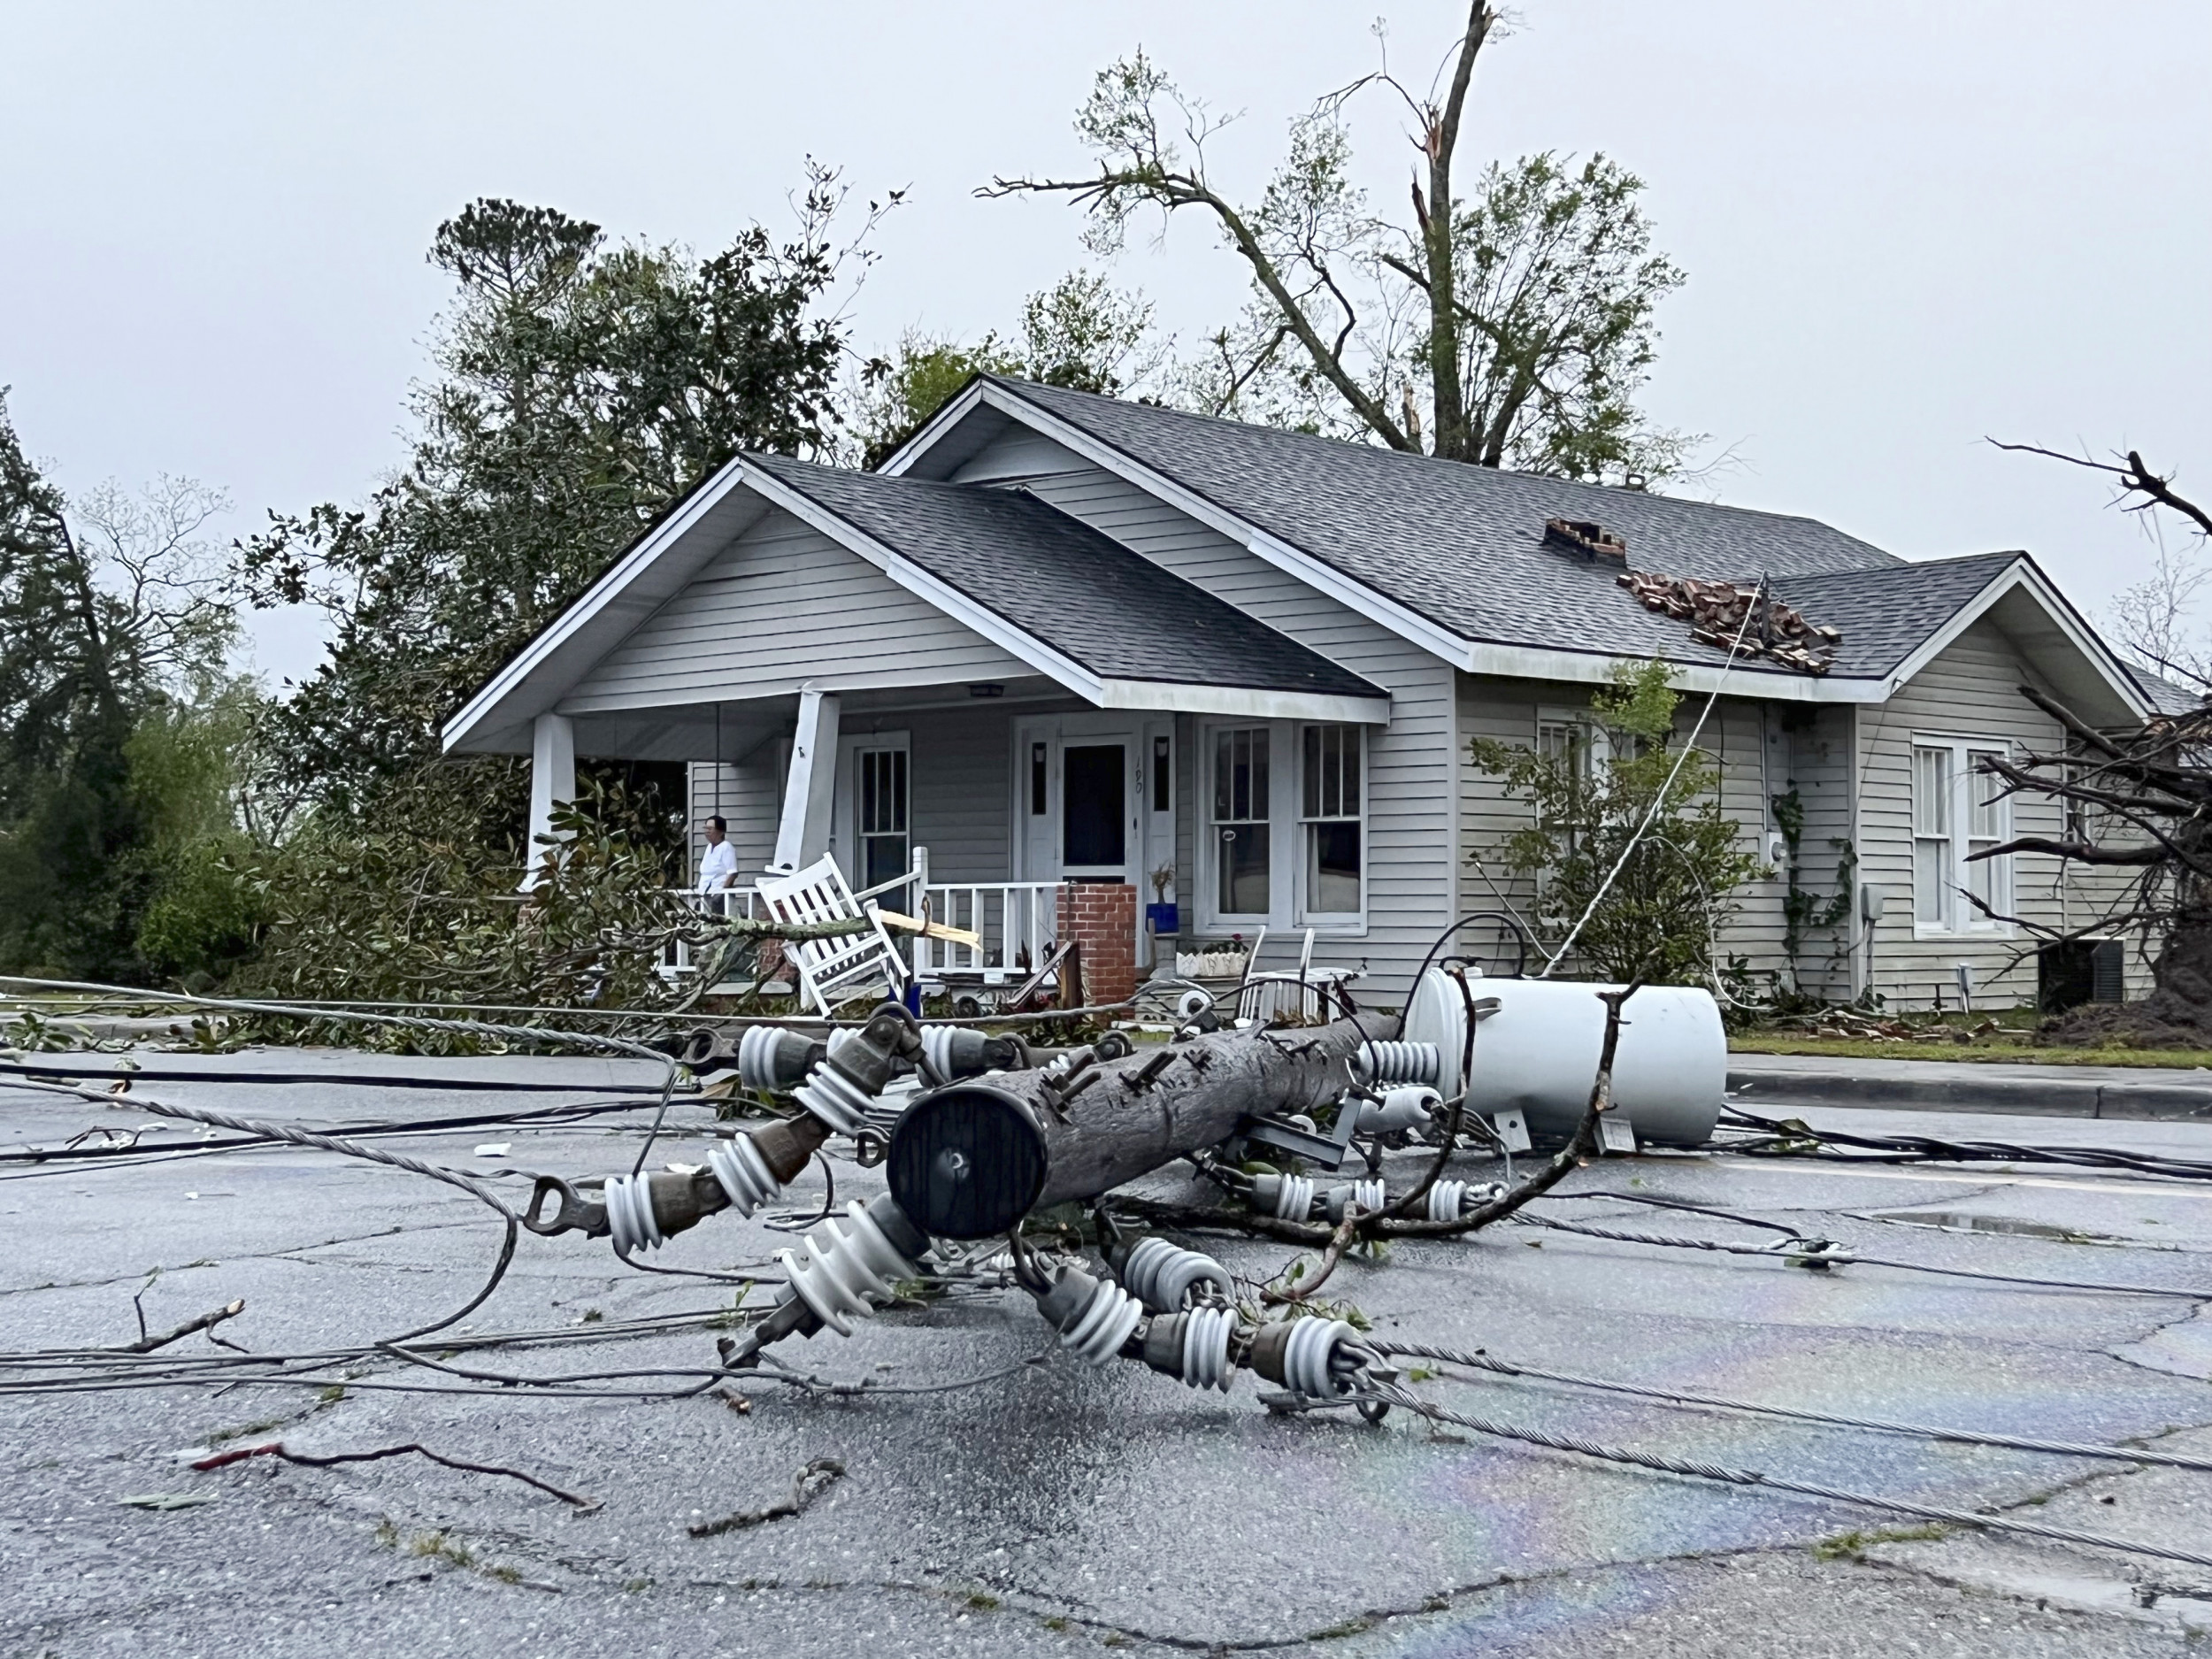 Tornadoes Decimate Small Towns in South Carolina, Leaving 1 Dead